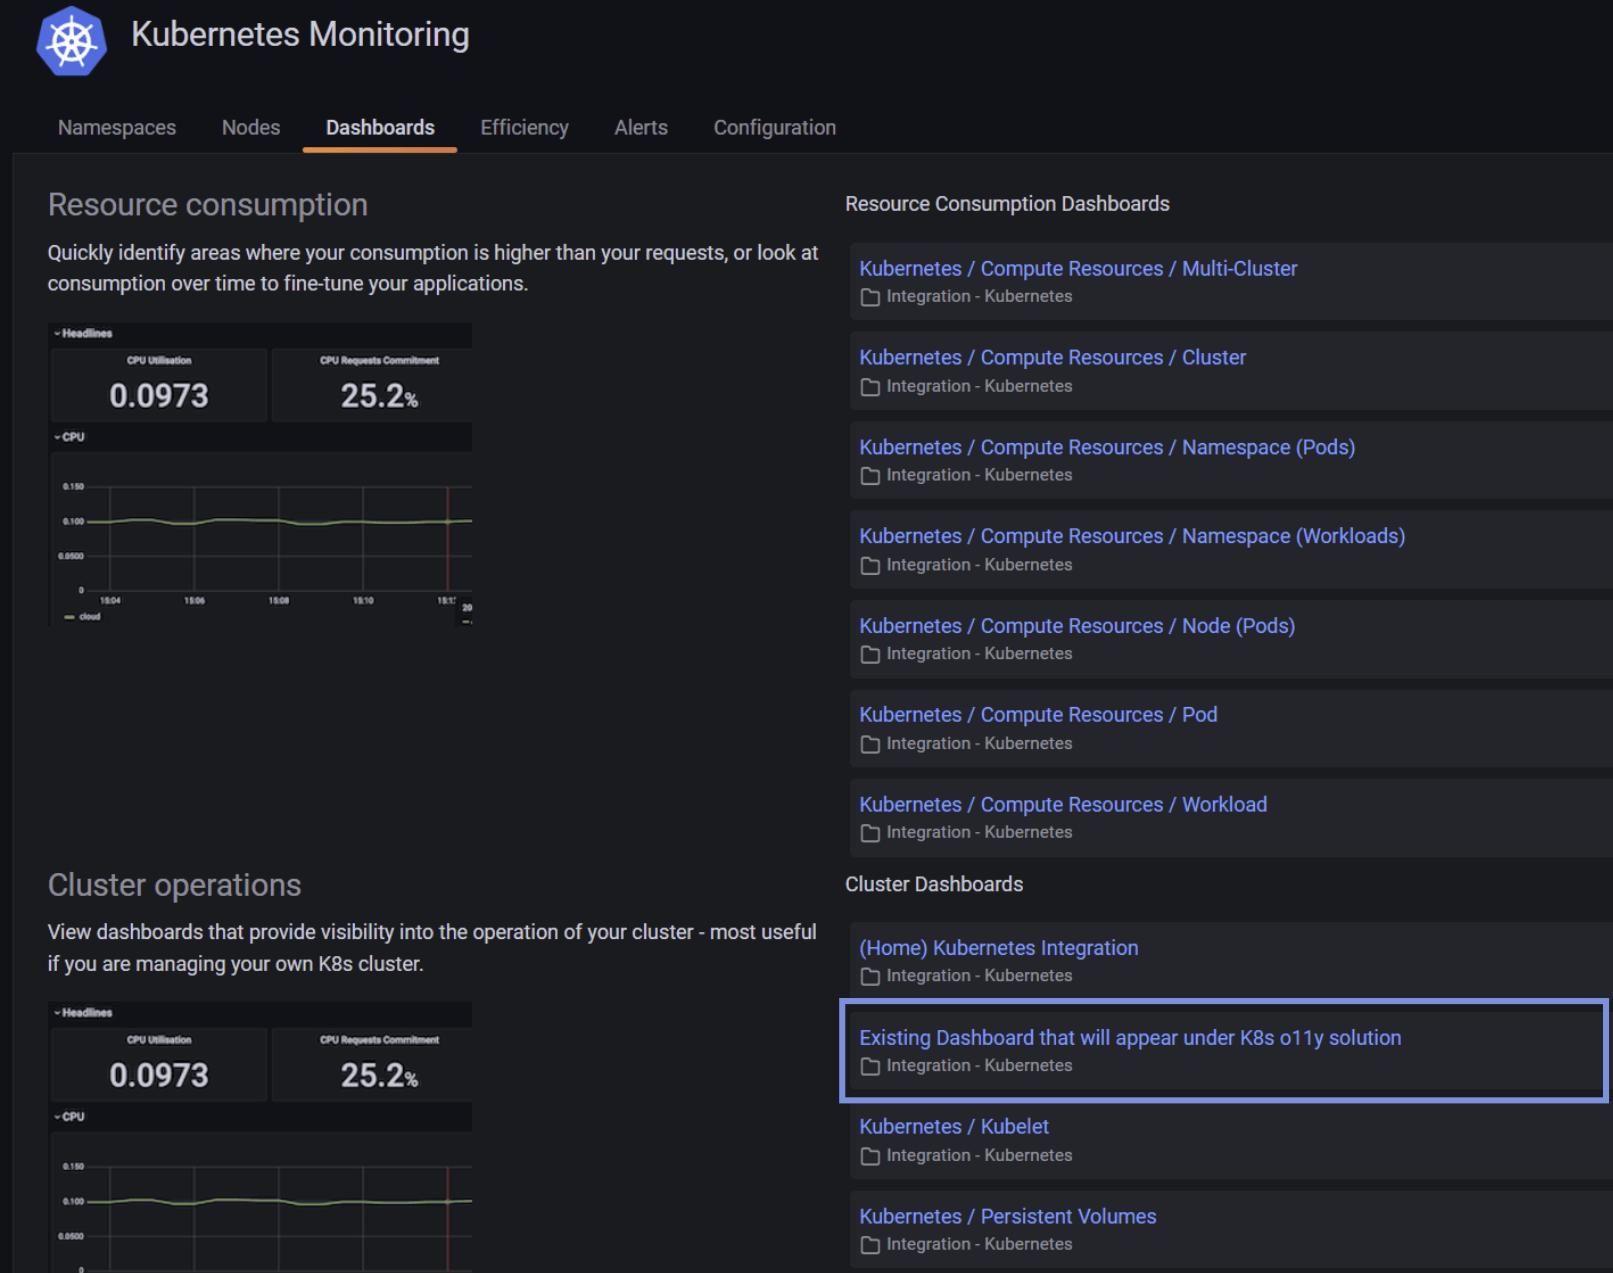 How to migrate existing Grafana dashboards and alerts into Kubernetes Monitoring in Grafana Cloud